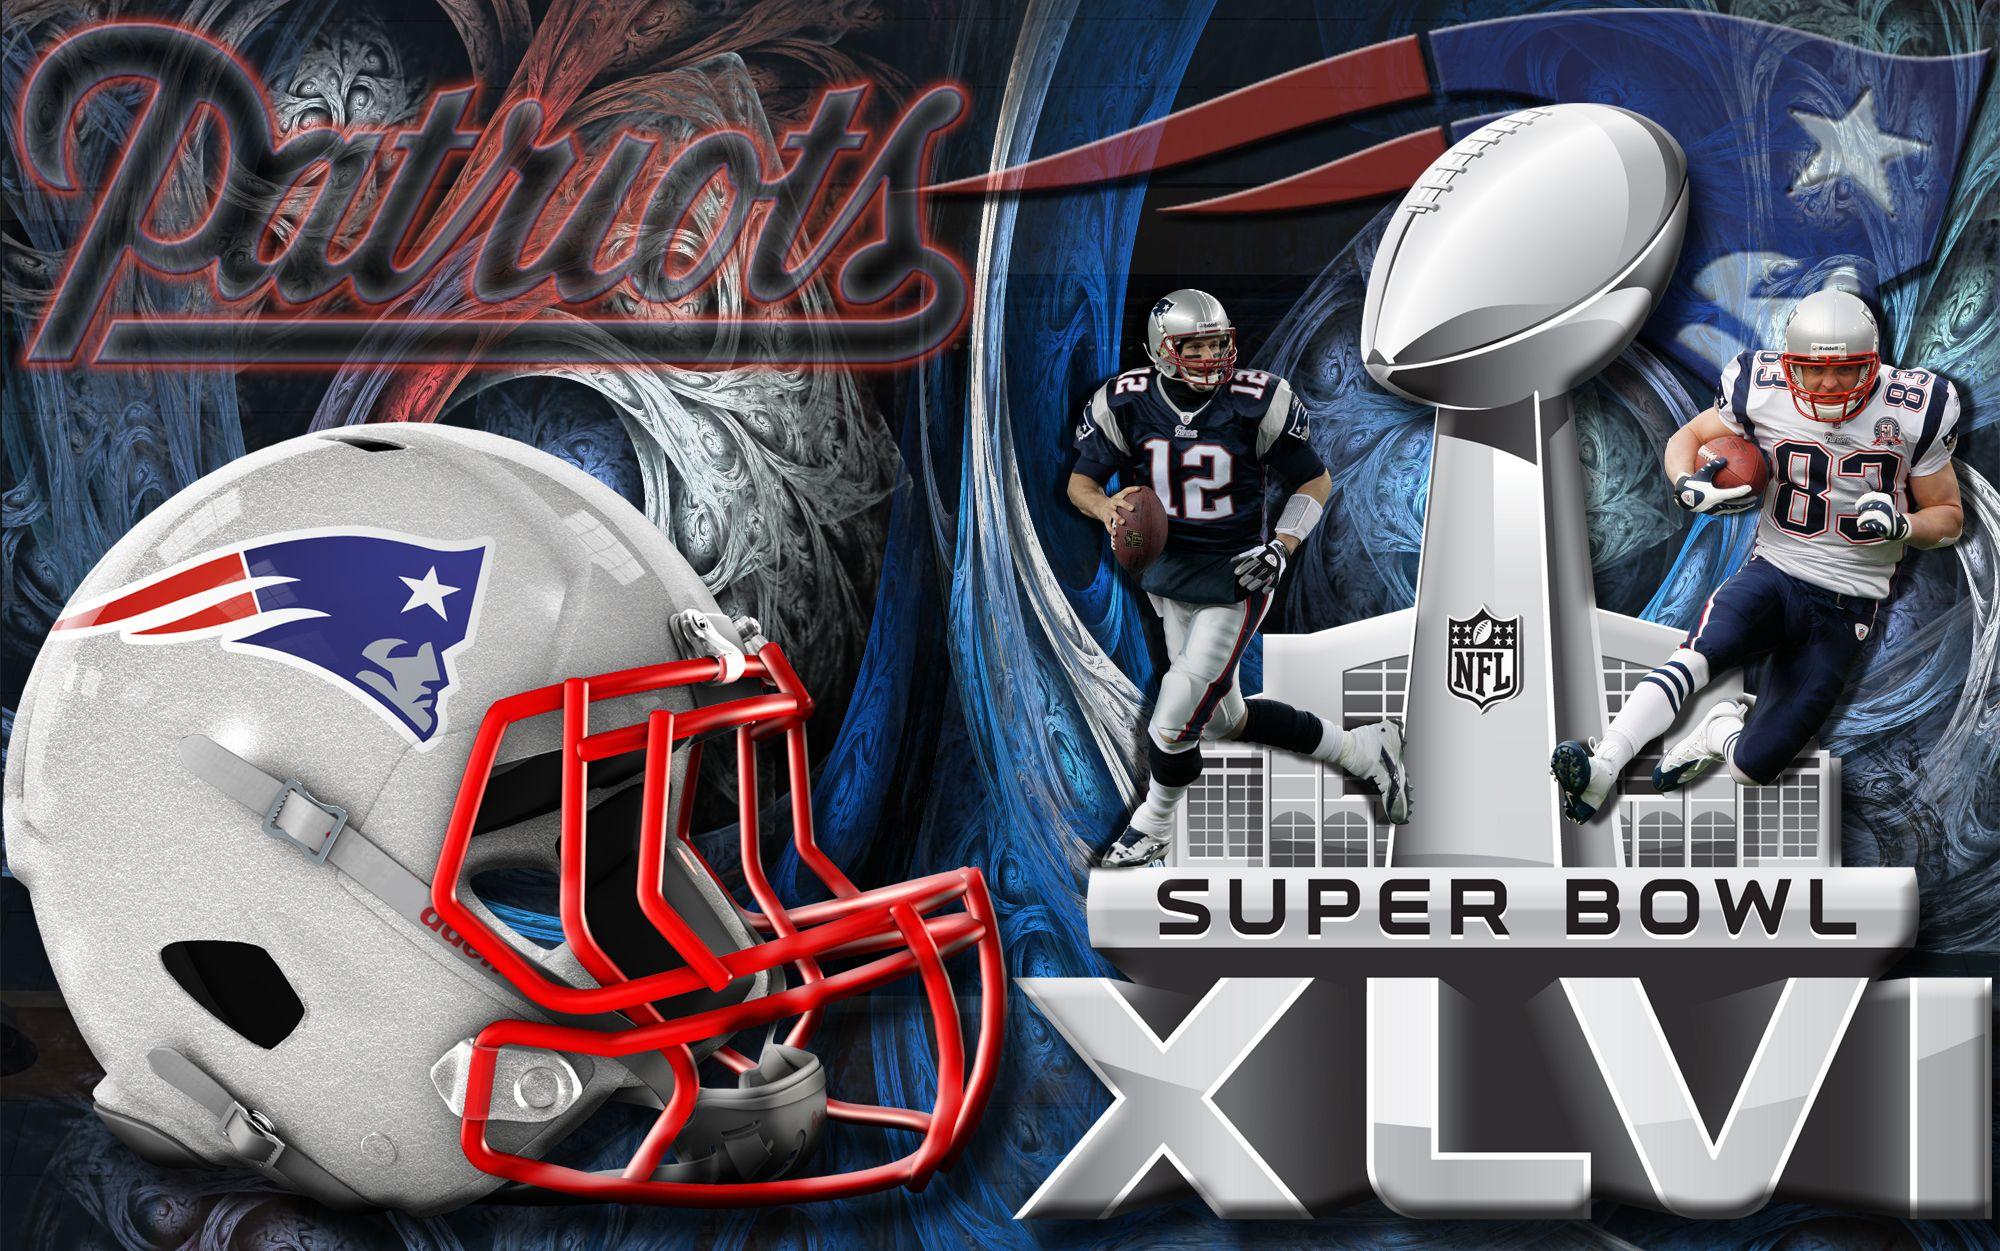 Wallpaper By Wicked Shadows: New England Patriots Super Bowl Wallpaper